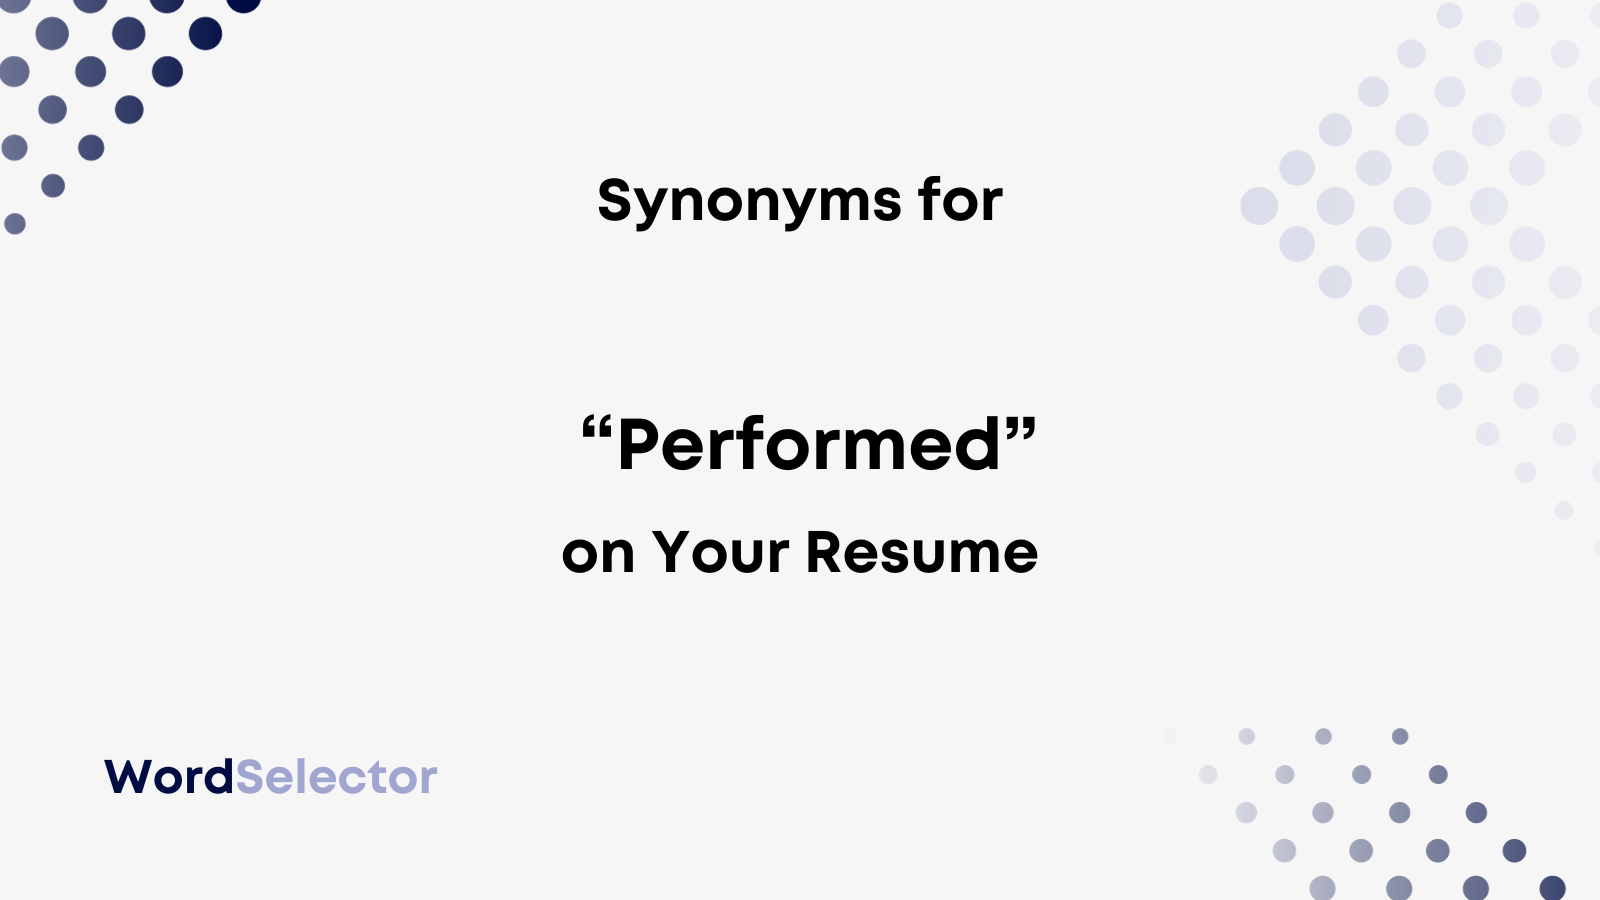 How to Use 'Execute' Synonyms in 2023 on Resumes, Cover Letters